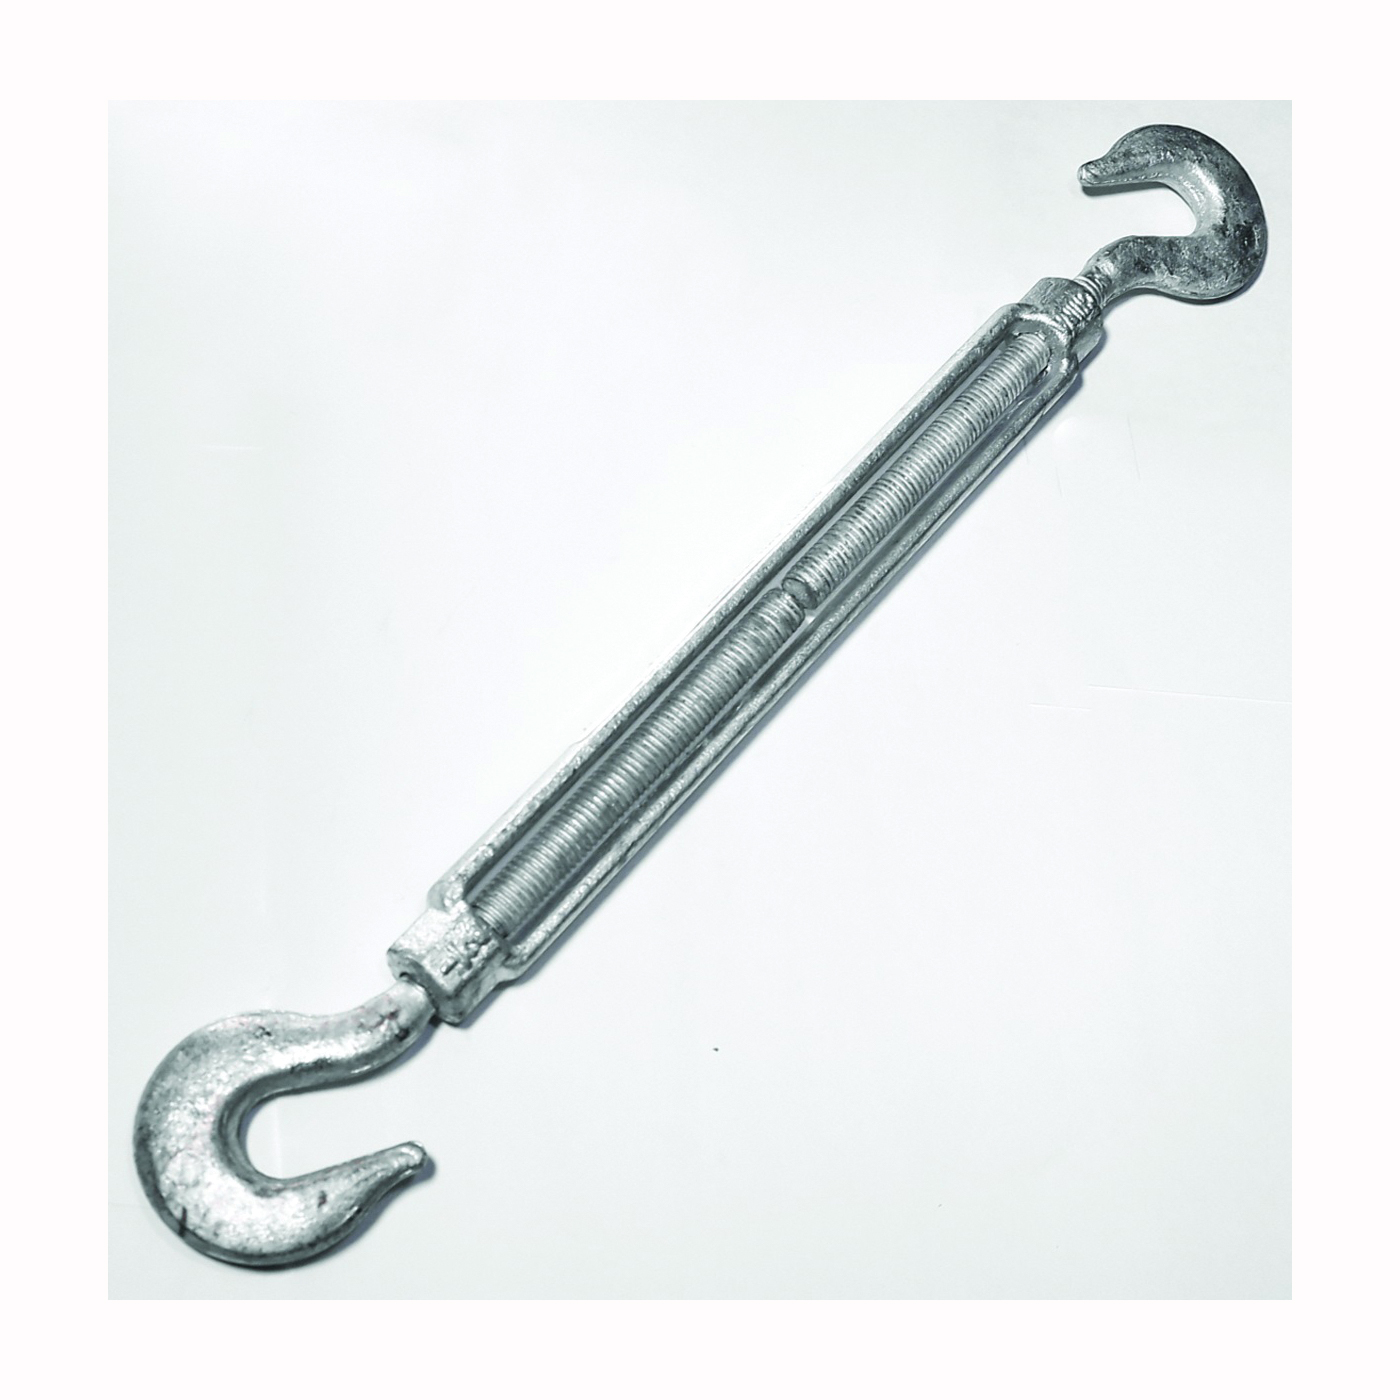 17-1/2X9 Turnbuckle, 1500 lb Working Load, 1/2 in Thread, Hook, Hook, 9 in L Take-Up, Galvanized Steel